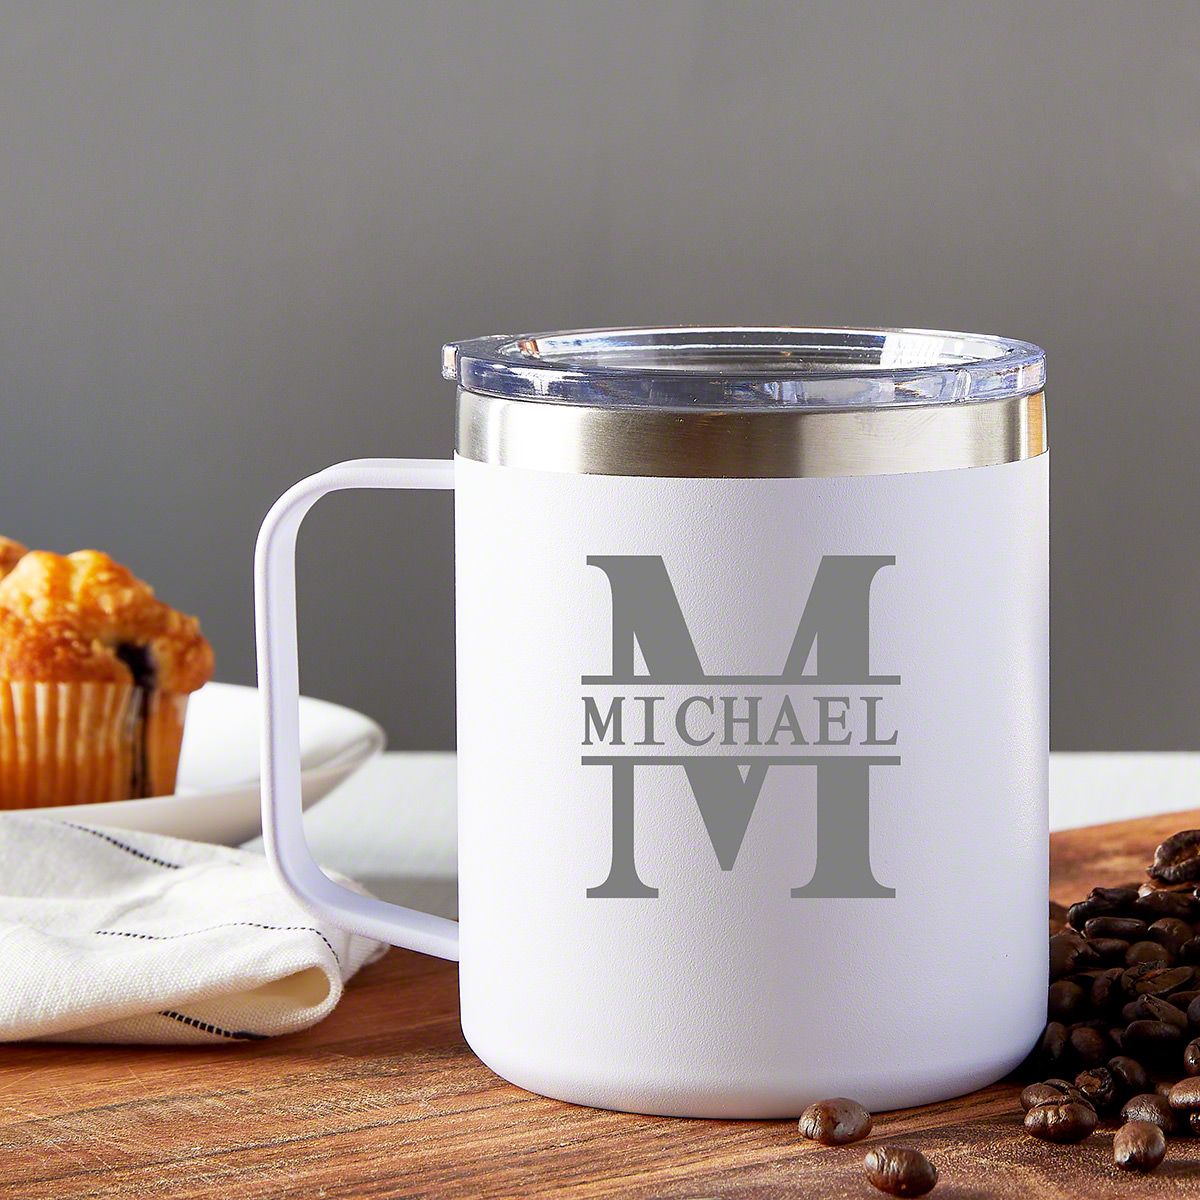 Personalized Stainless Steel Travel Coffee Mug With Handle